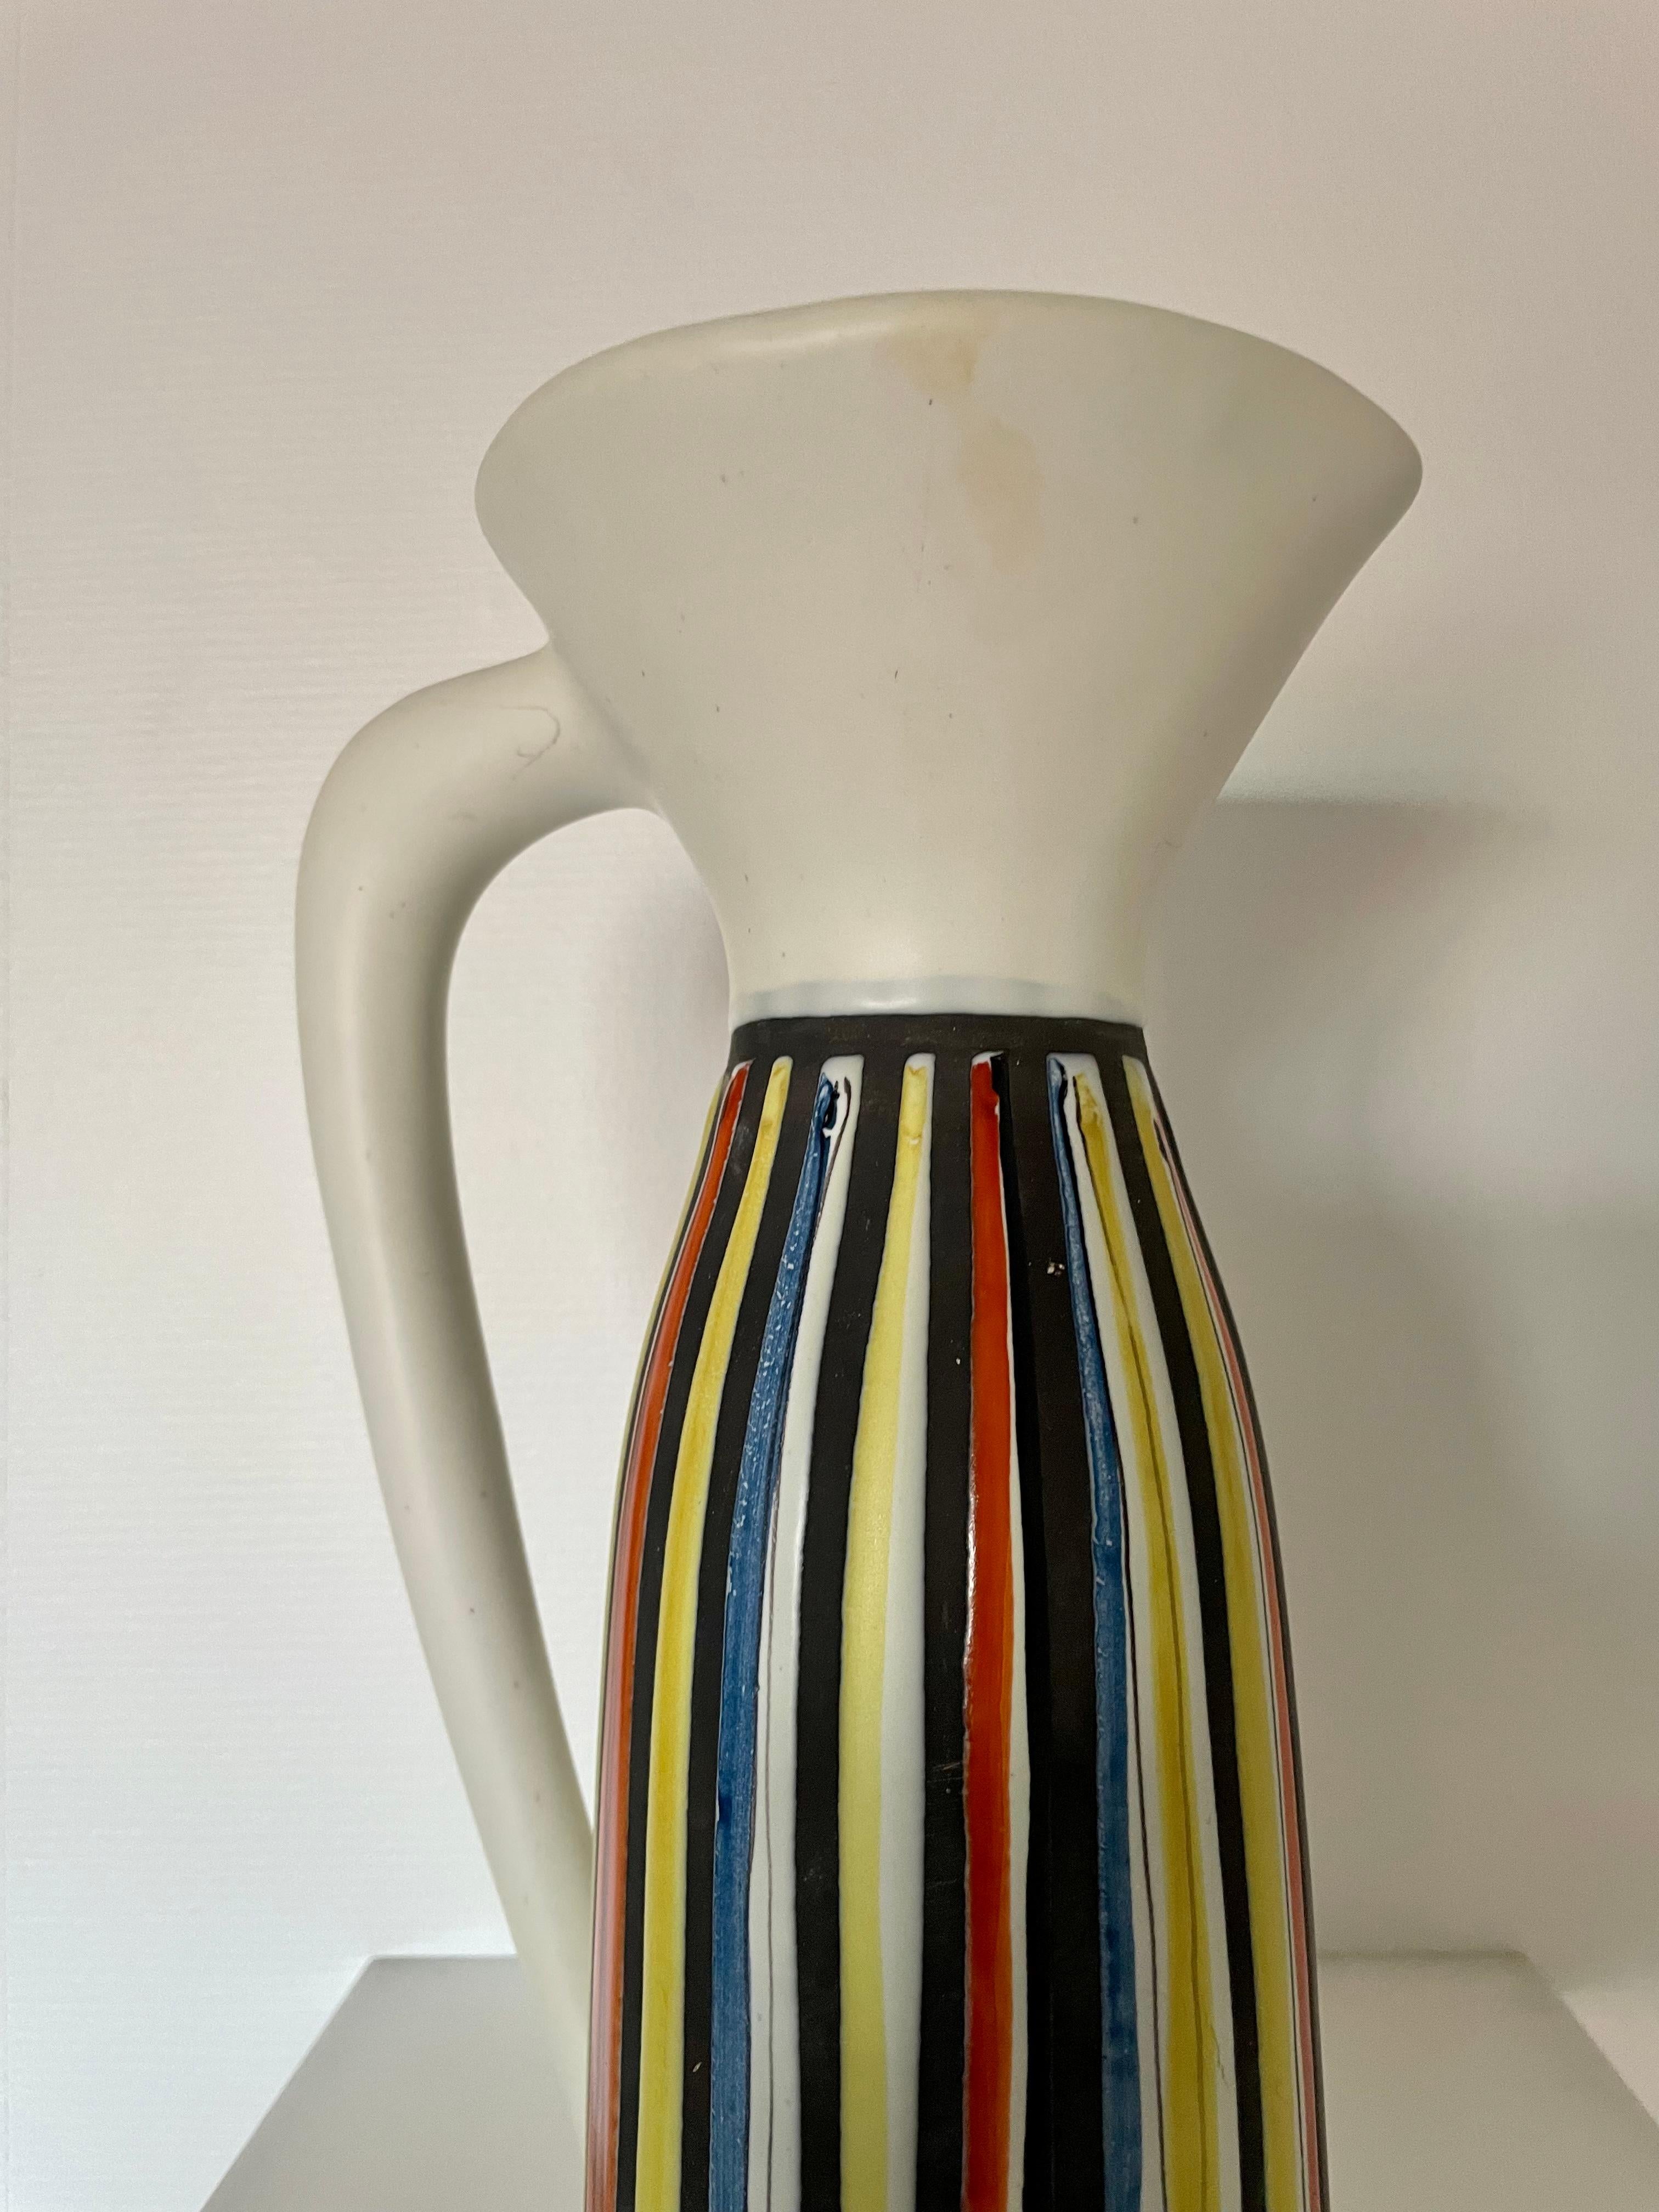 Roger Capron was a student of Applied Arts in Paris from 1938 to 1943 before teaching drawing there from 1945 In 1946 he moved to Vallauris where he created a ceramics workshop
 Callis In doing so he joined forces with Robert Picault and then Jean